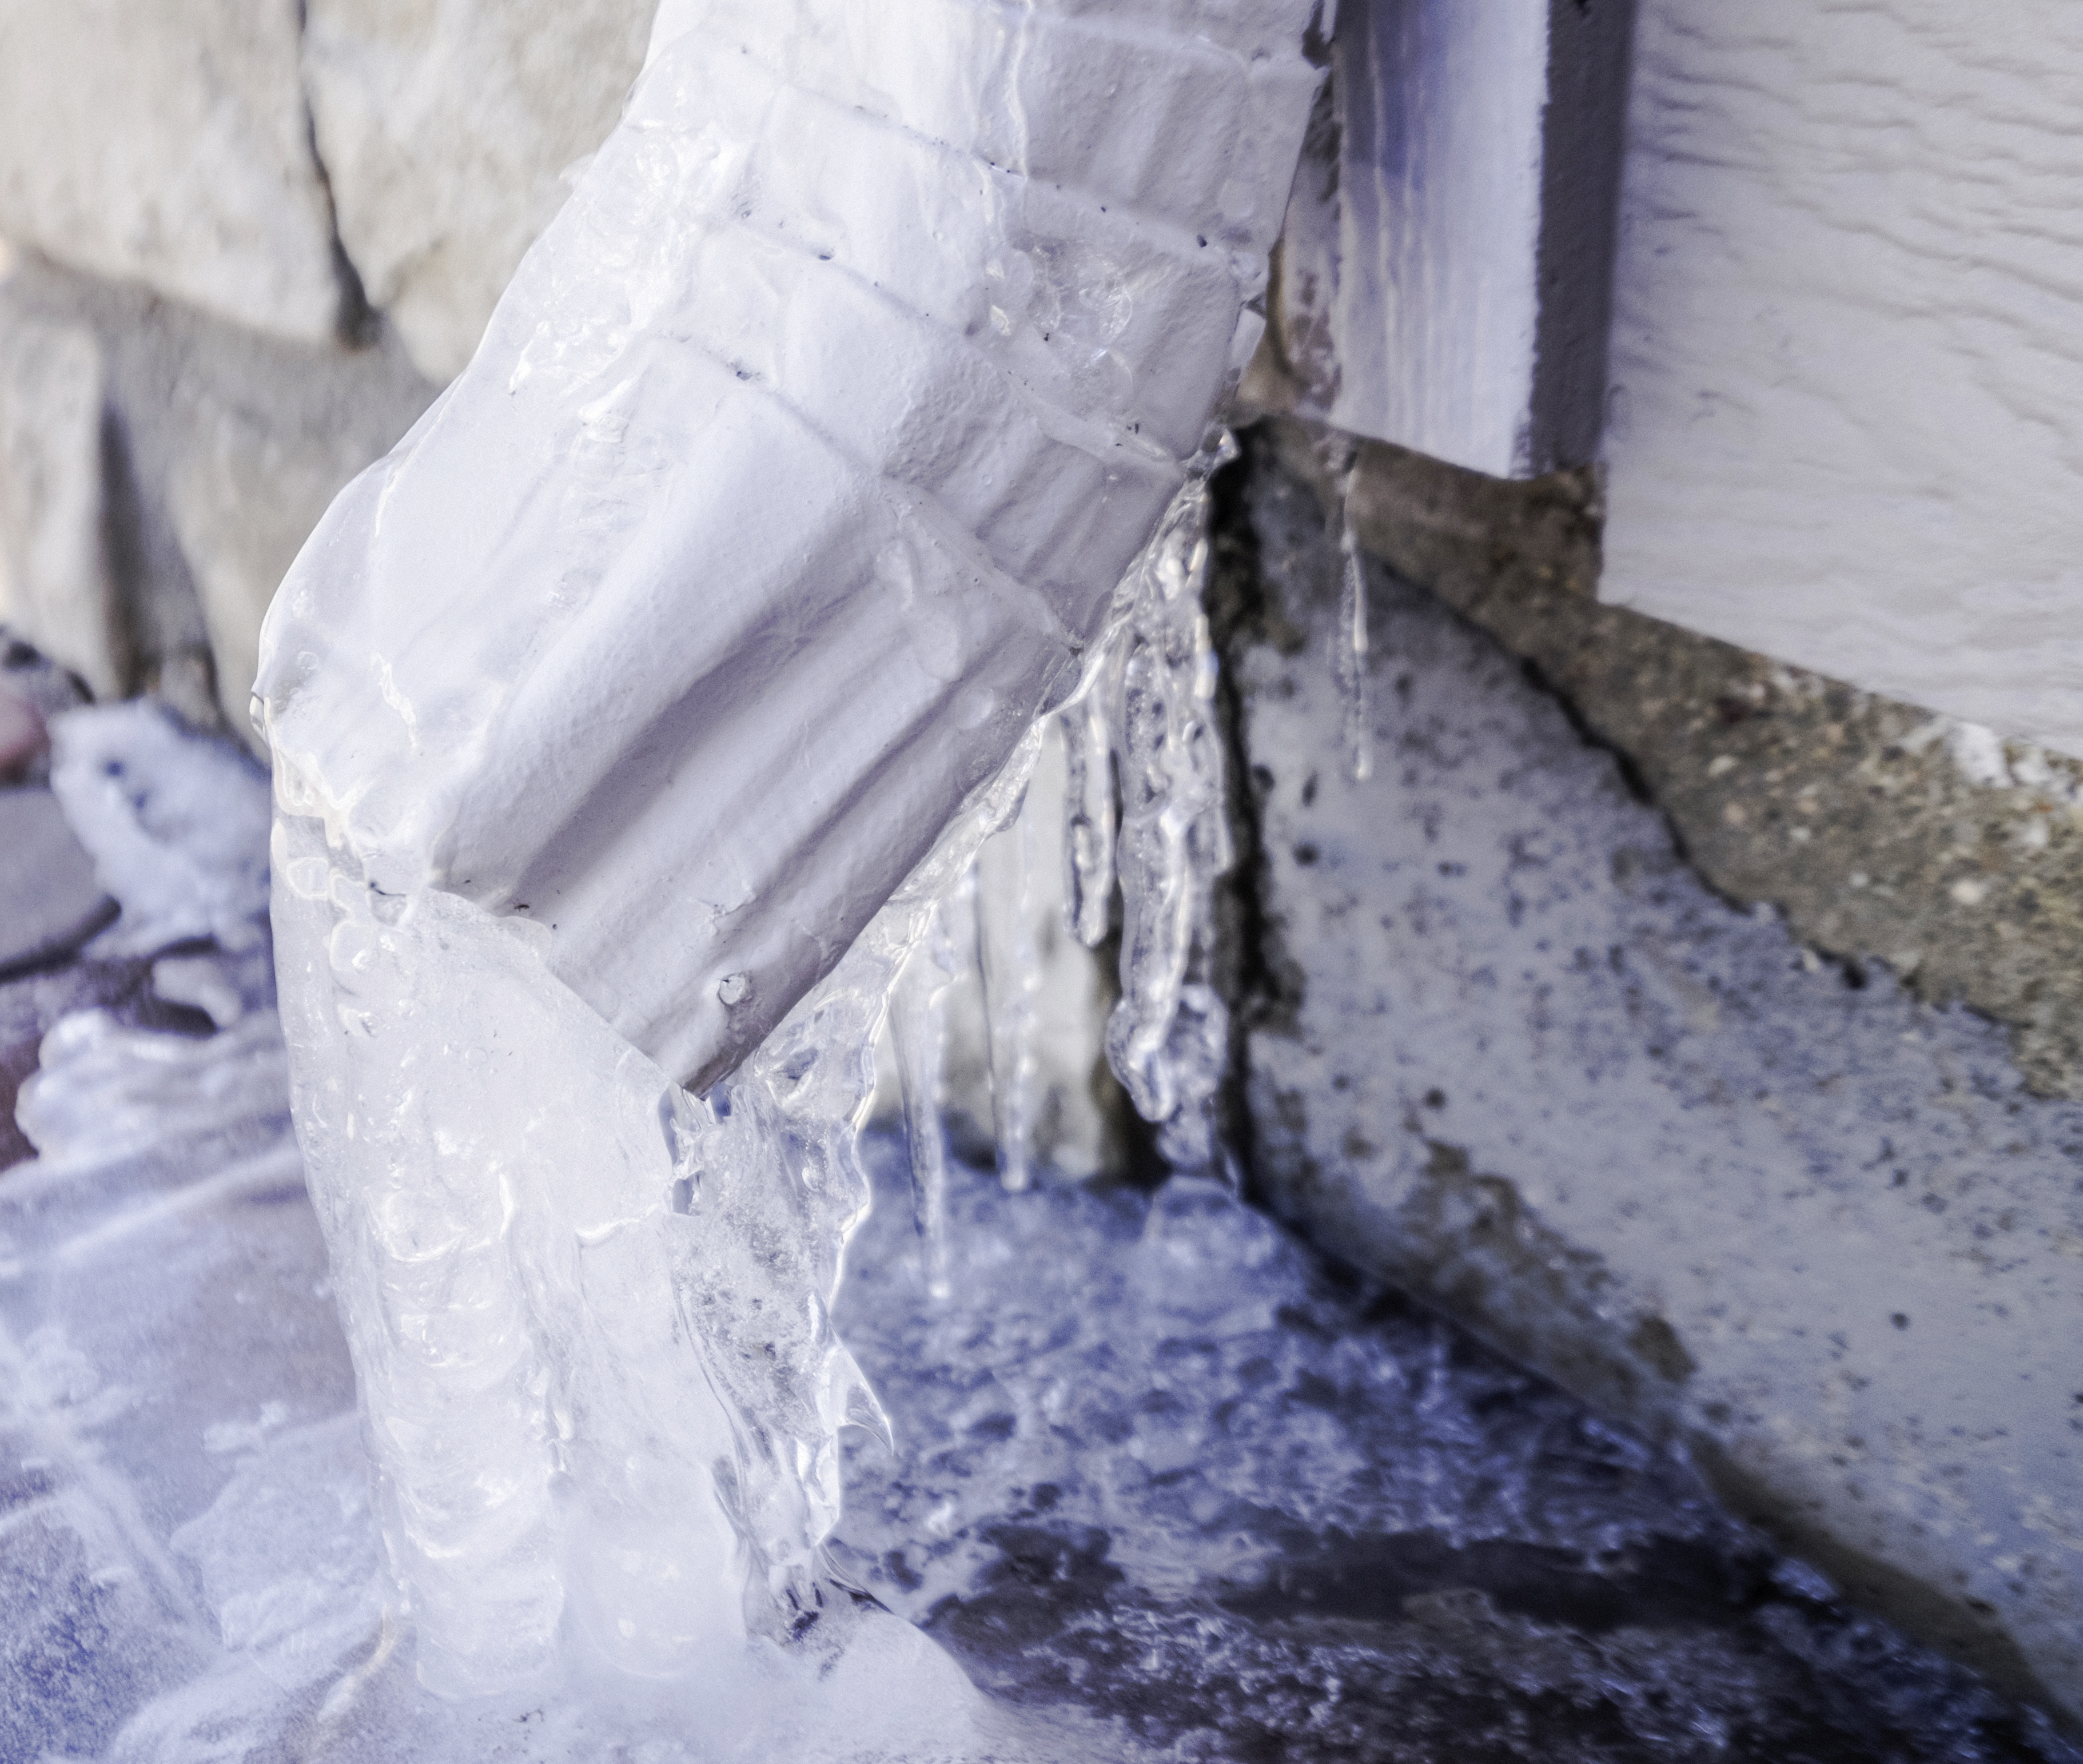 Tips to prevent basement flooding during heavy rains